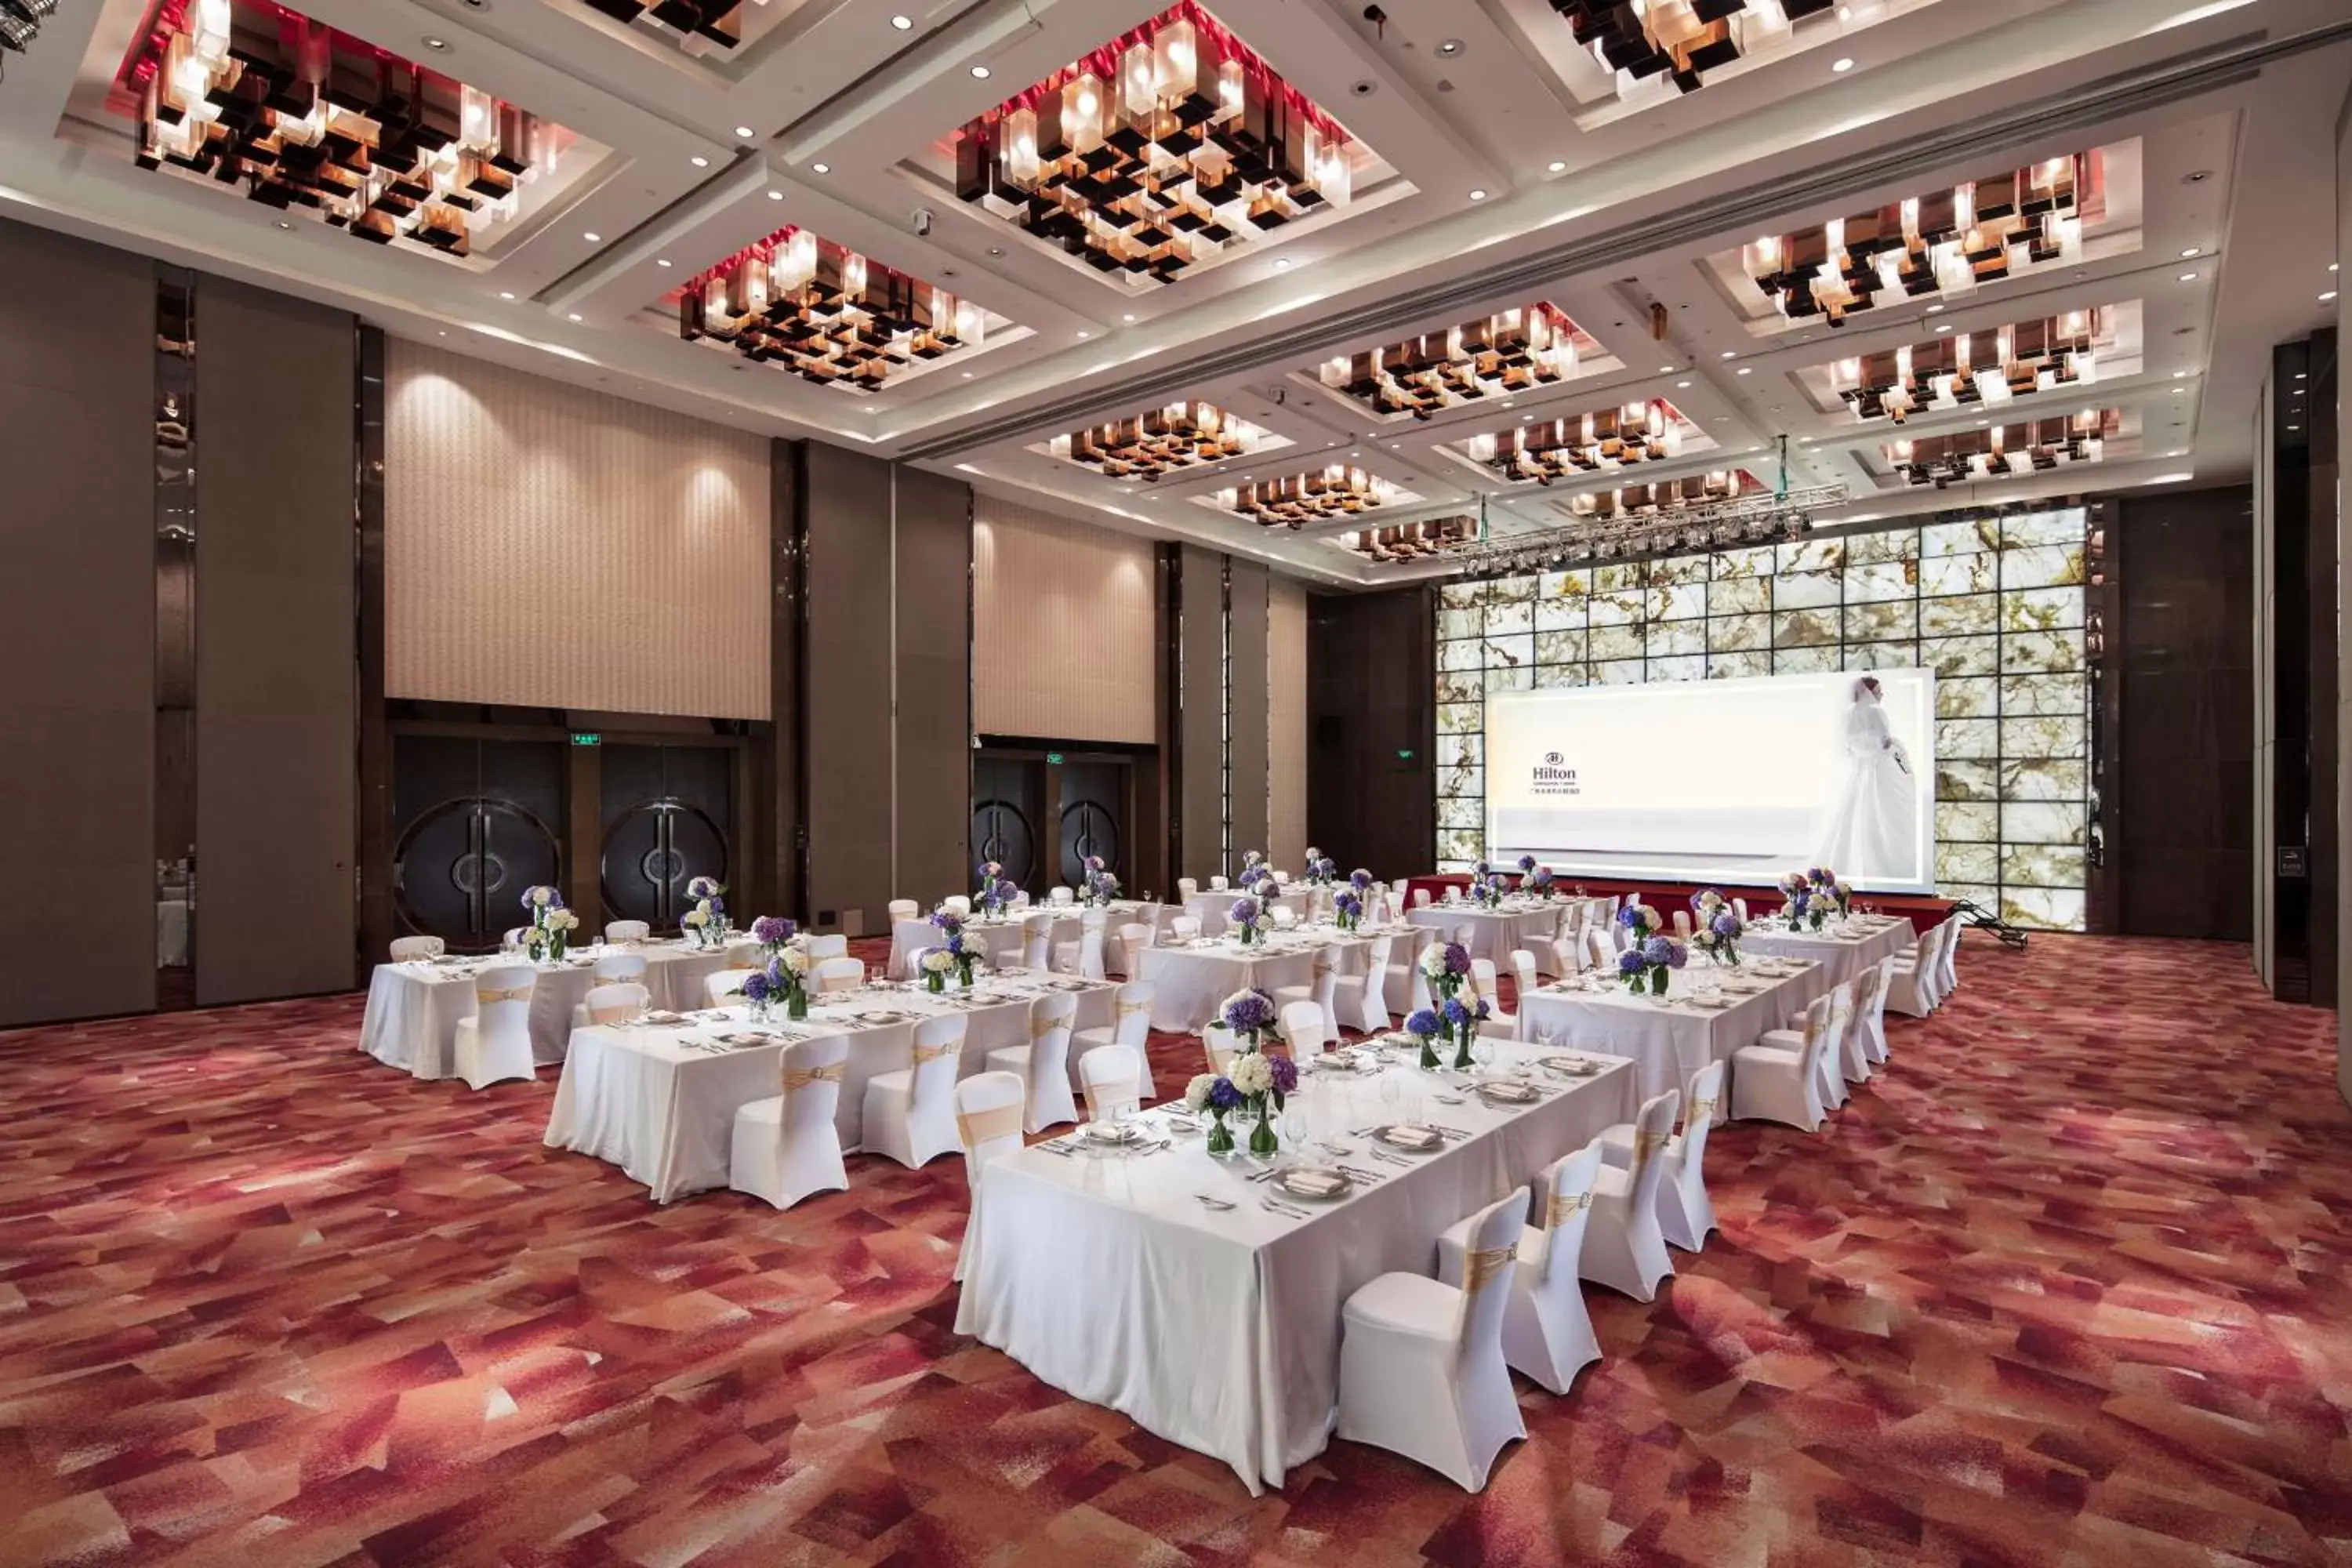 Meeting/conference room, Banquet Facilities in Hilton Guangzhou Tianhe